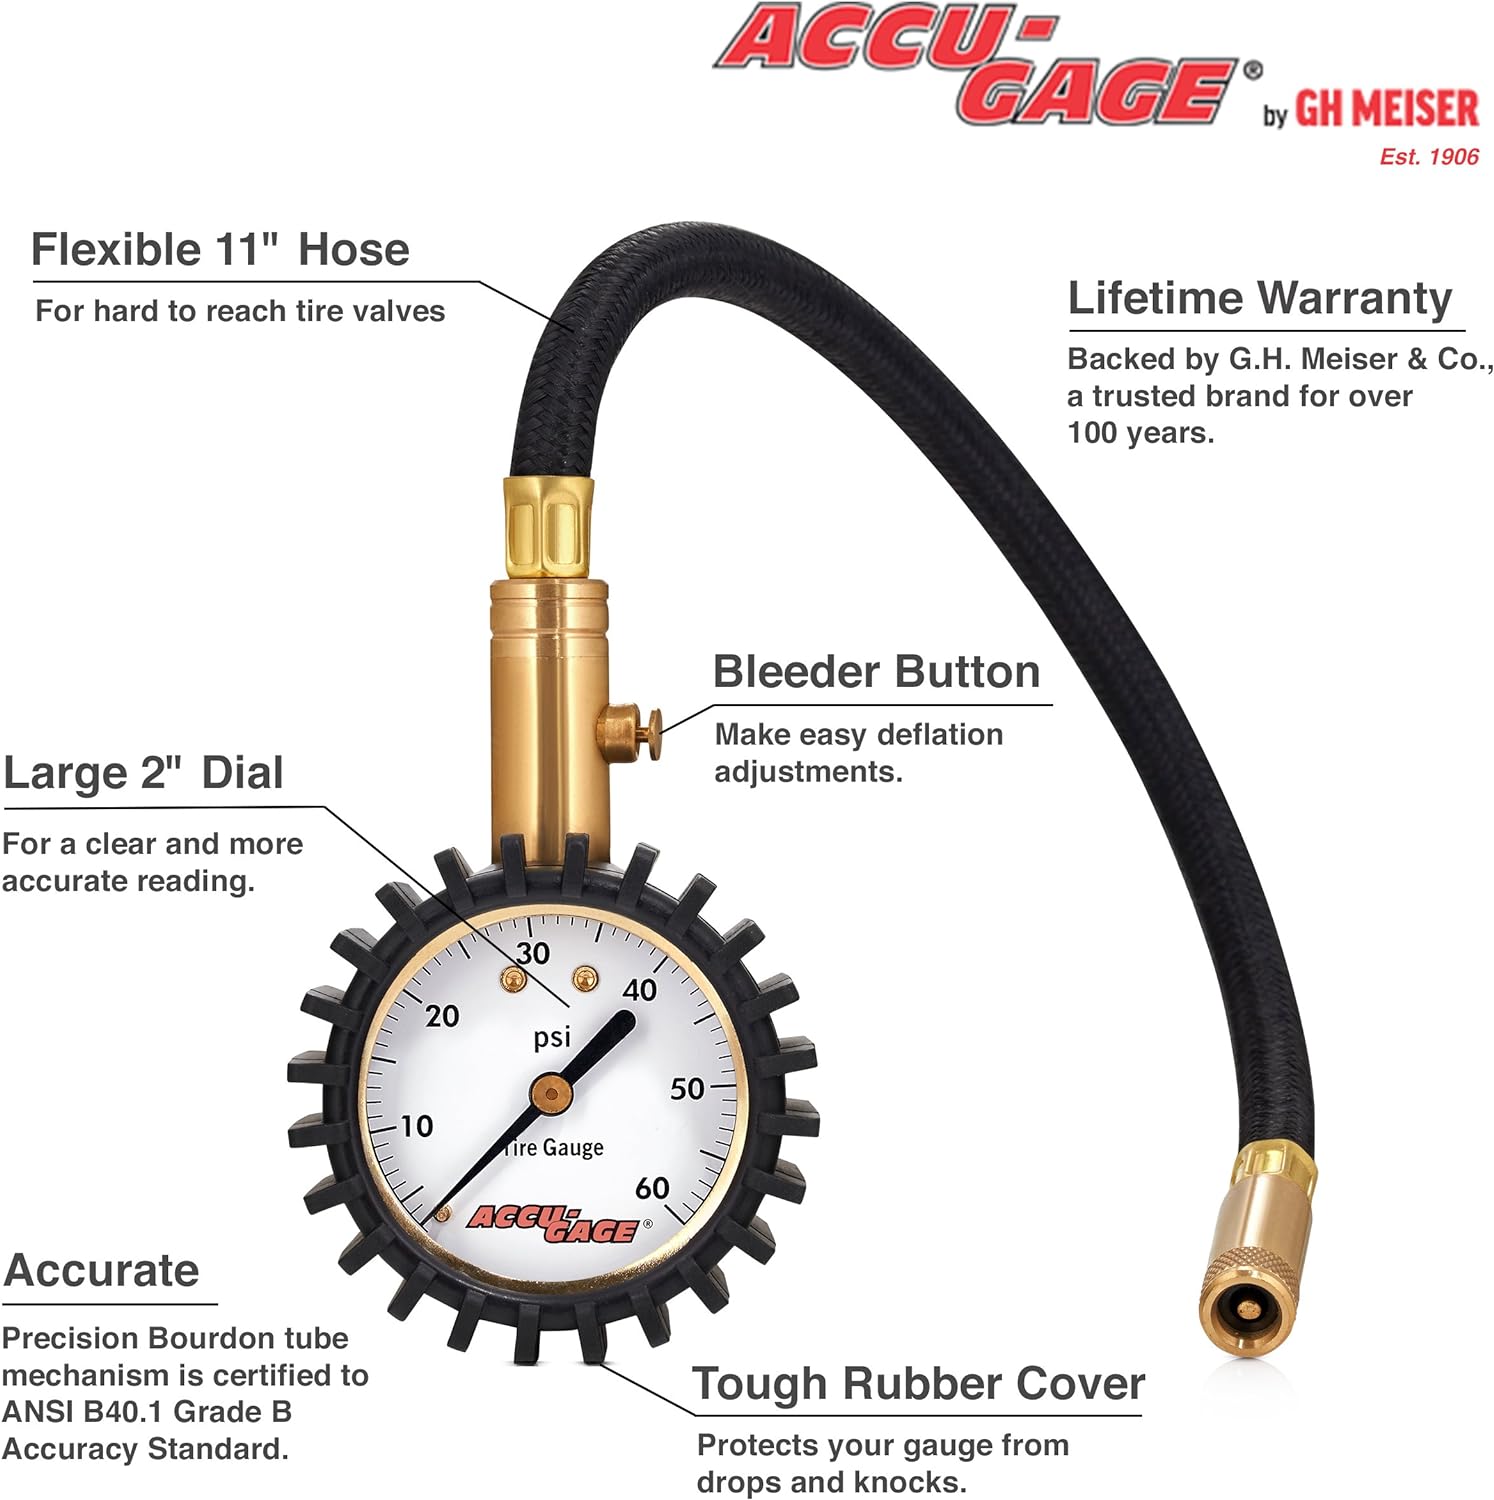 Accu-Gage RH60X Professional Tire Pressure Gauge with Protective Rubber Guard (60 PSI),Straight Chuck